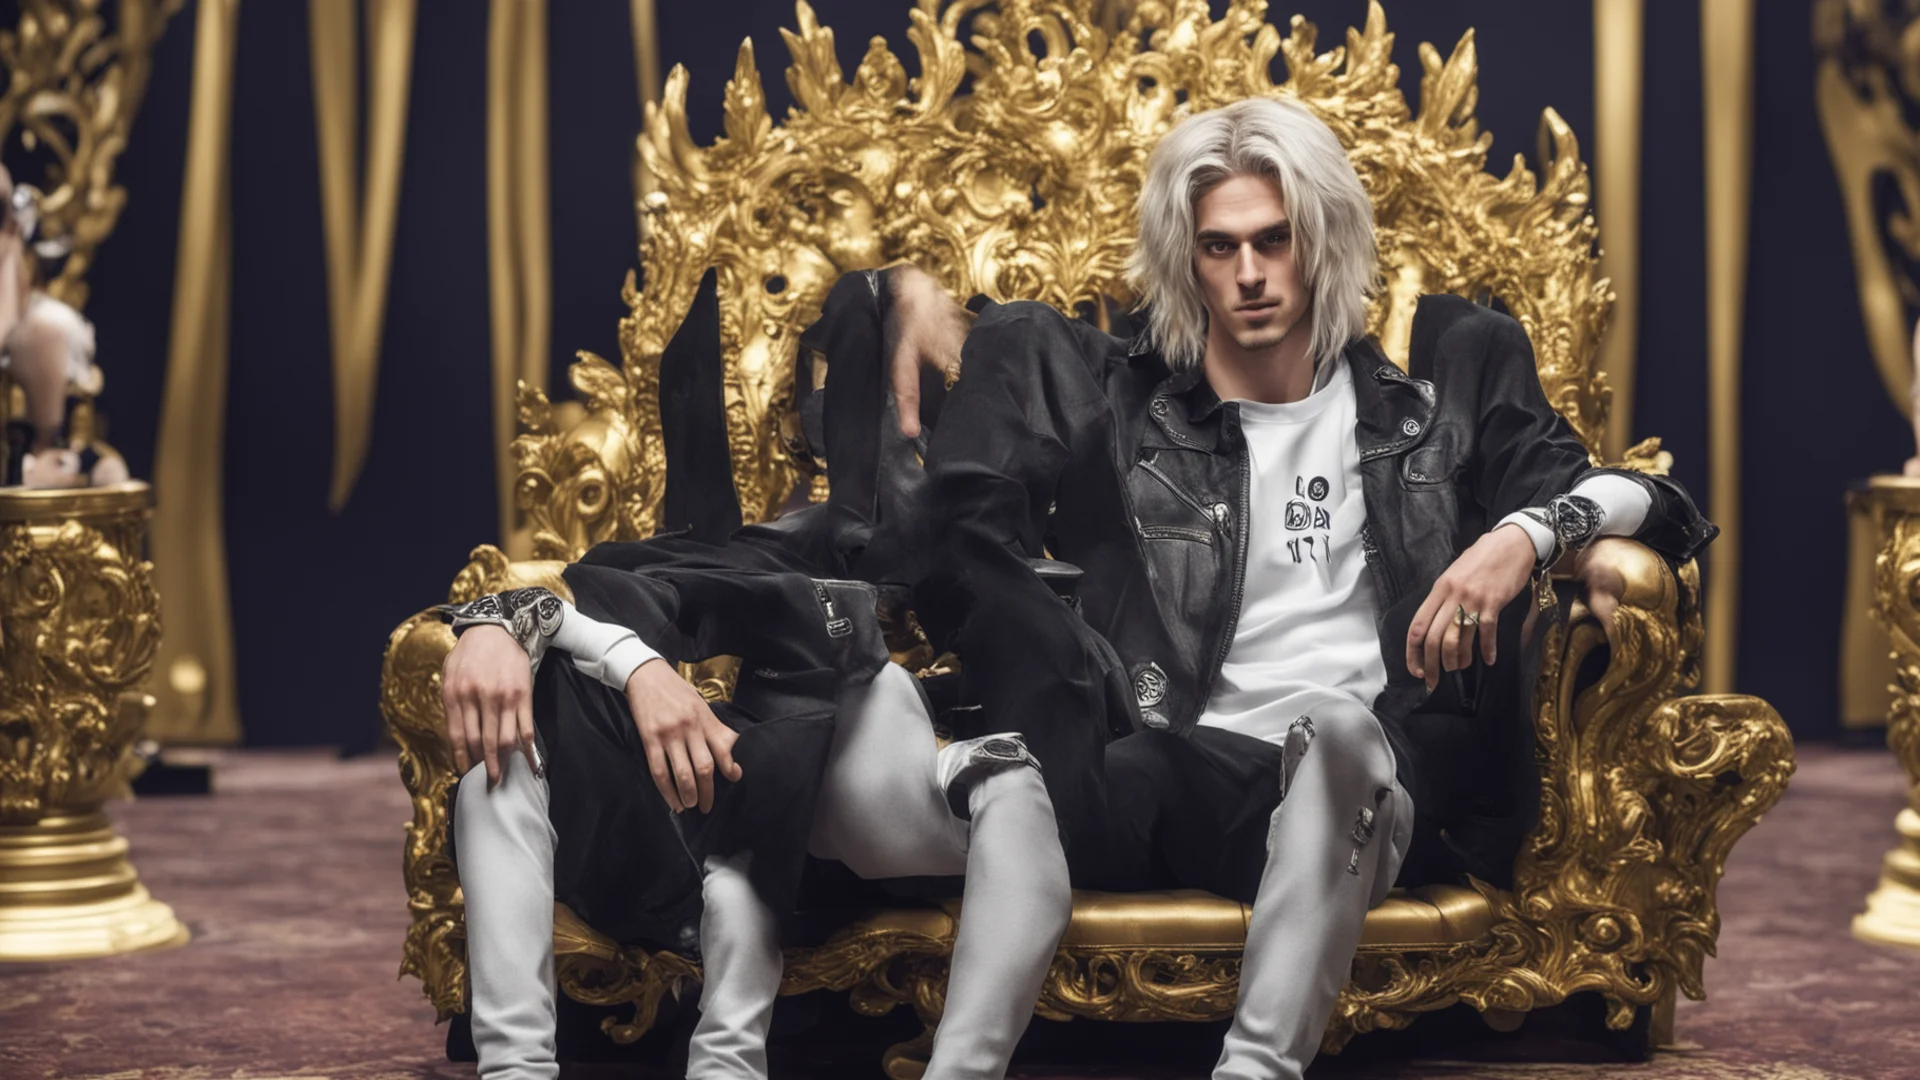 xqc sitting on s casino throne confident engaging wow artstation art 3 wide